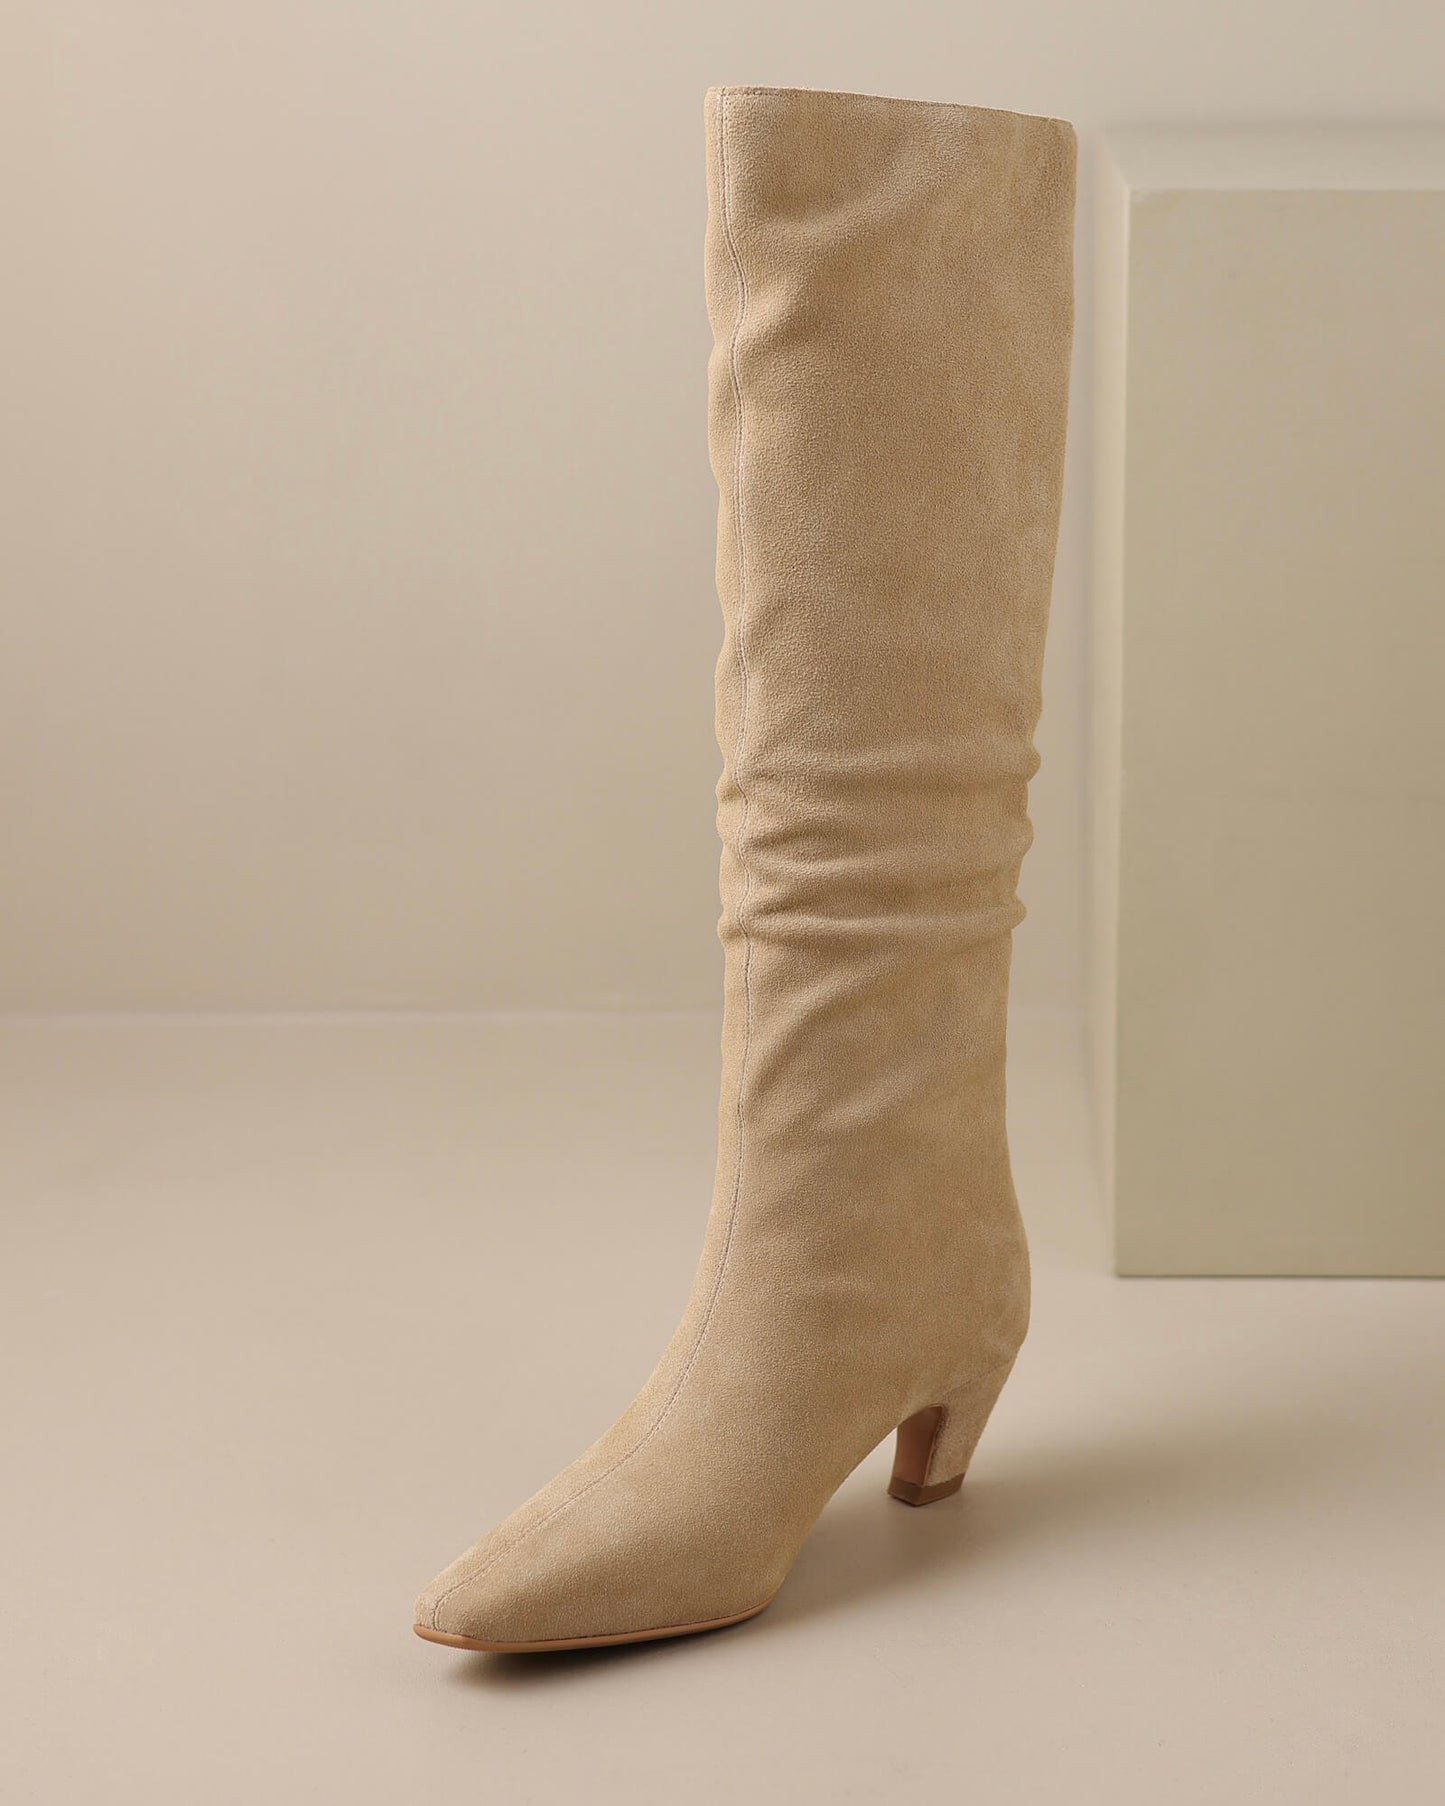 Miolo-suede-knee-high-boots-camel-1